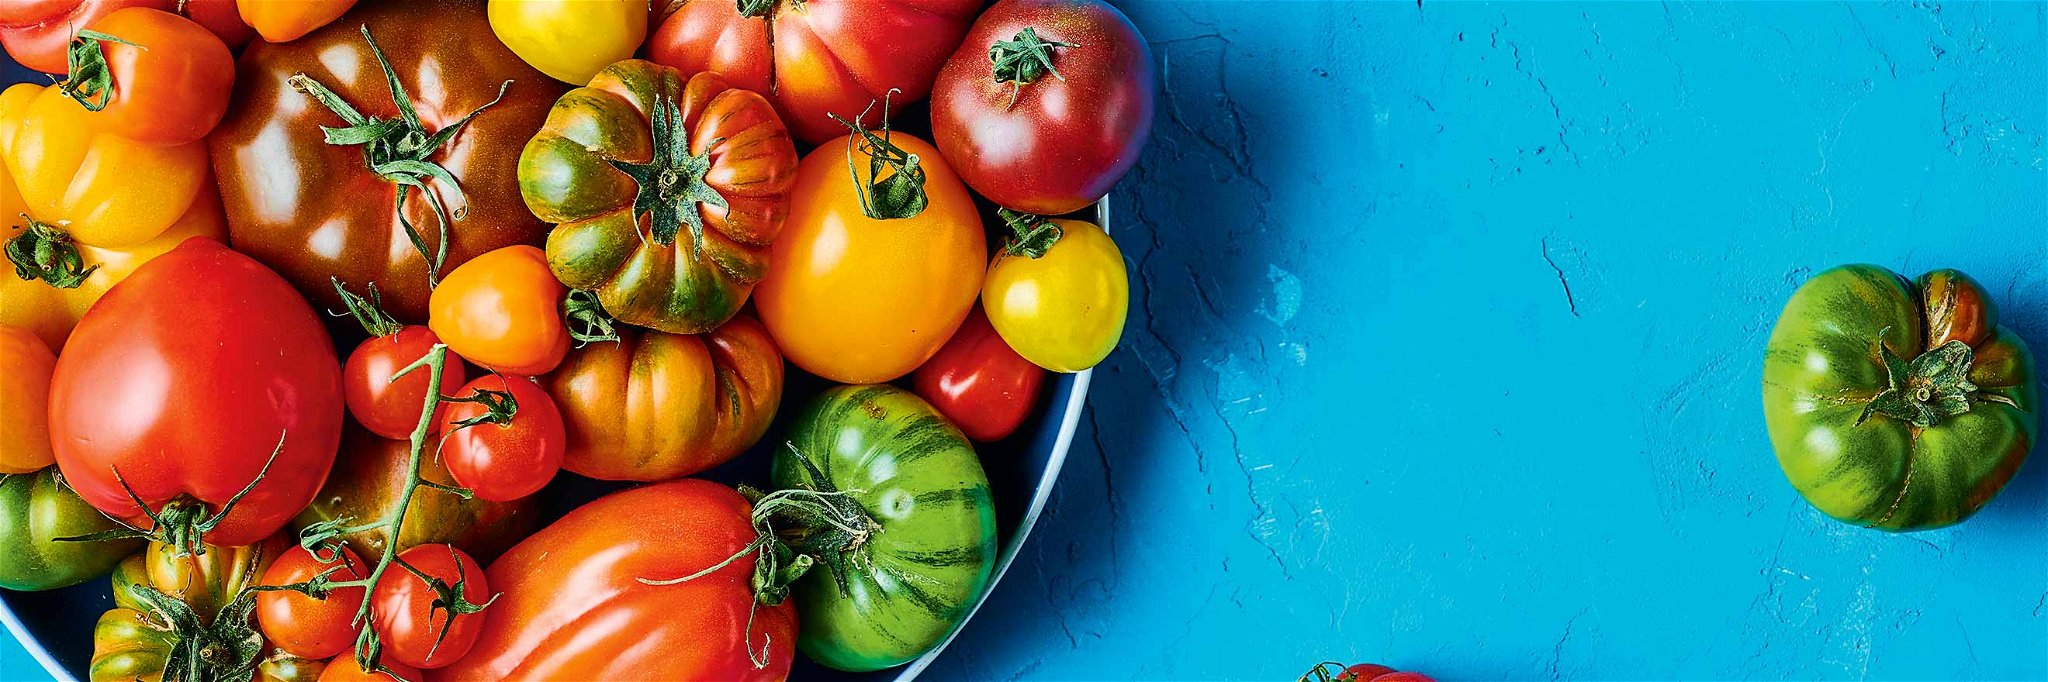 Tomatoes: The Most Popular Varieties, the Best Recipes